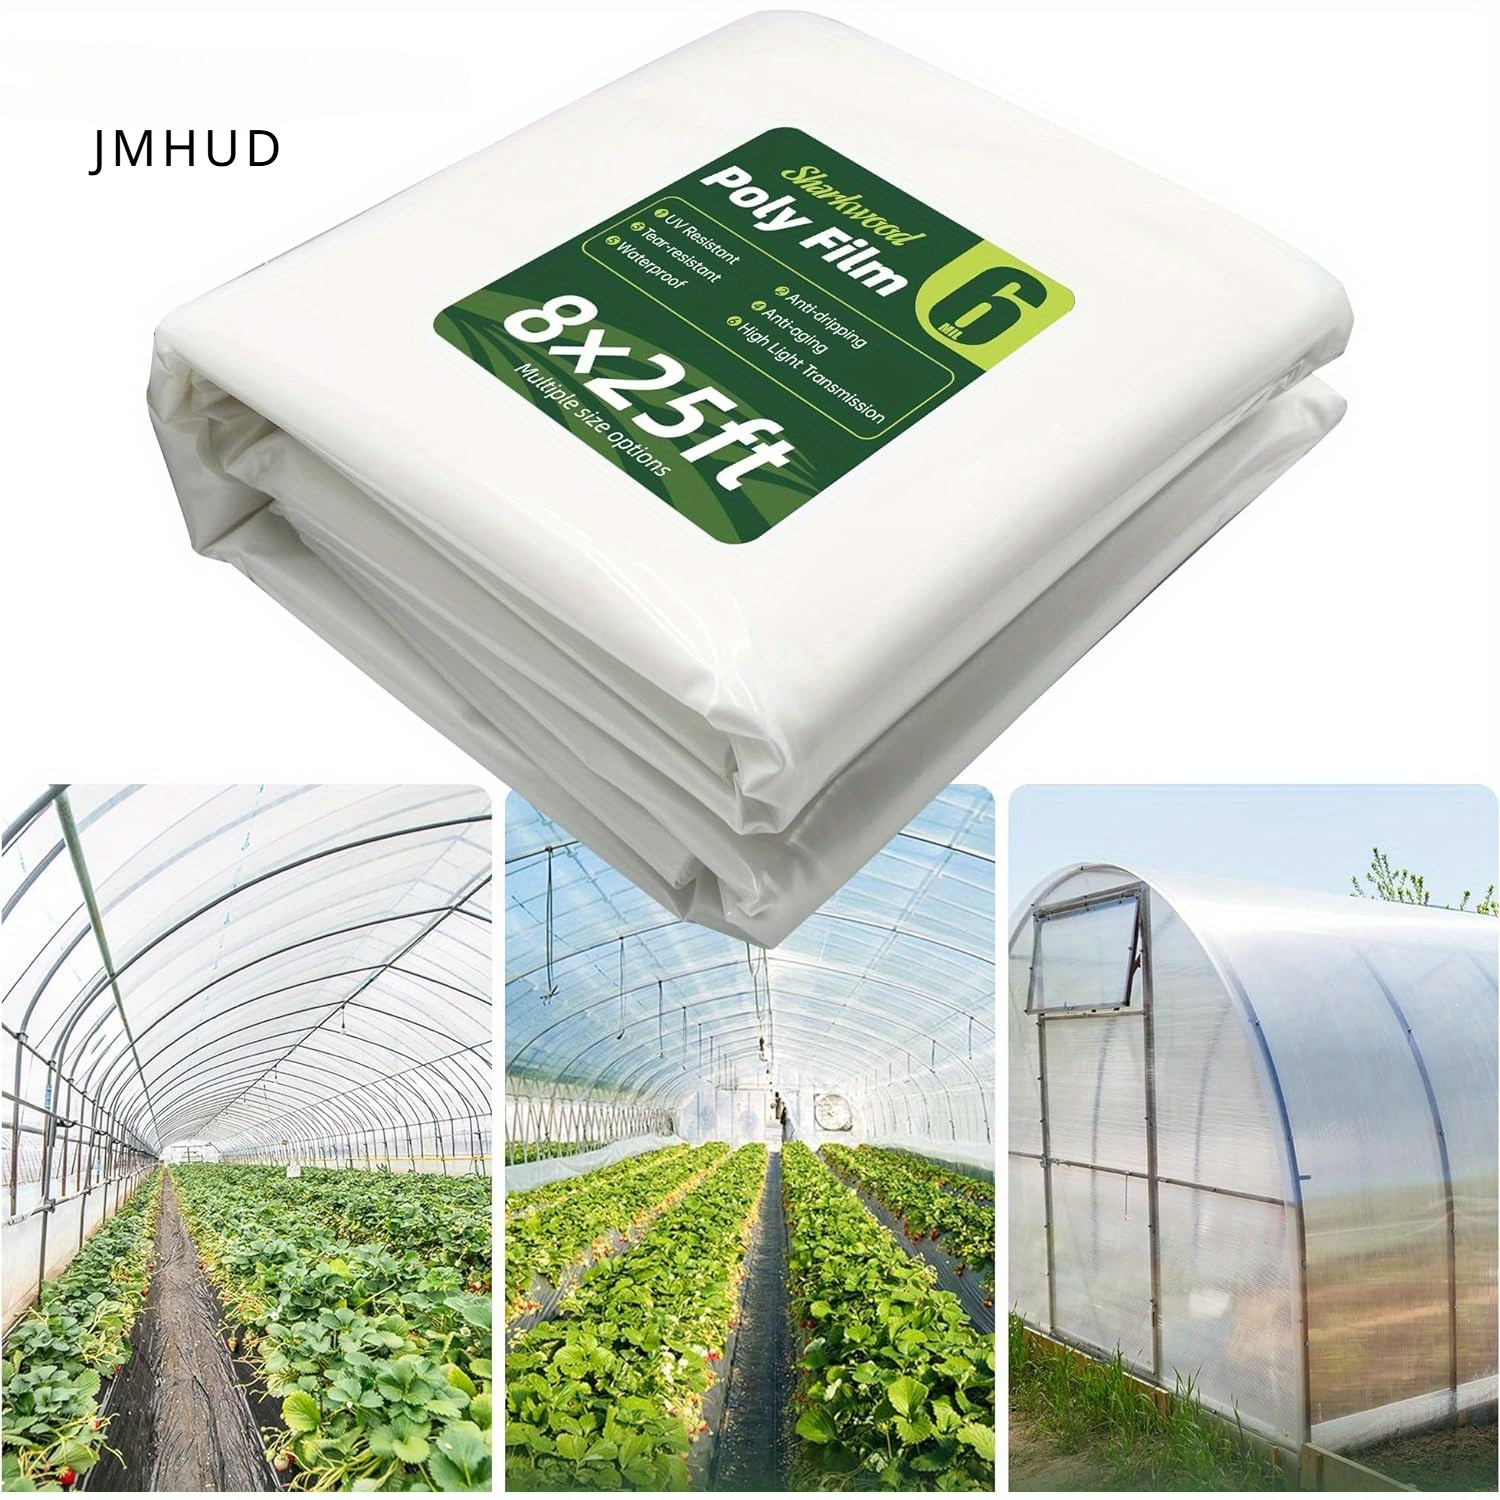 

Jmhud 6 Mil Thick Clear Polyethylene Film, 8 X 25 Ft Greenhouse Plastic Sheeting Cover For Farm, Uv Resistant Plastic Sheeting Heavy Duty, Garden, Agriculture